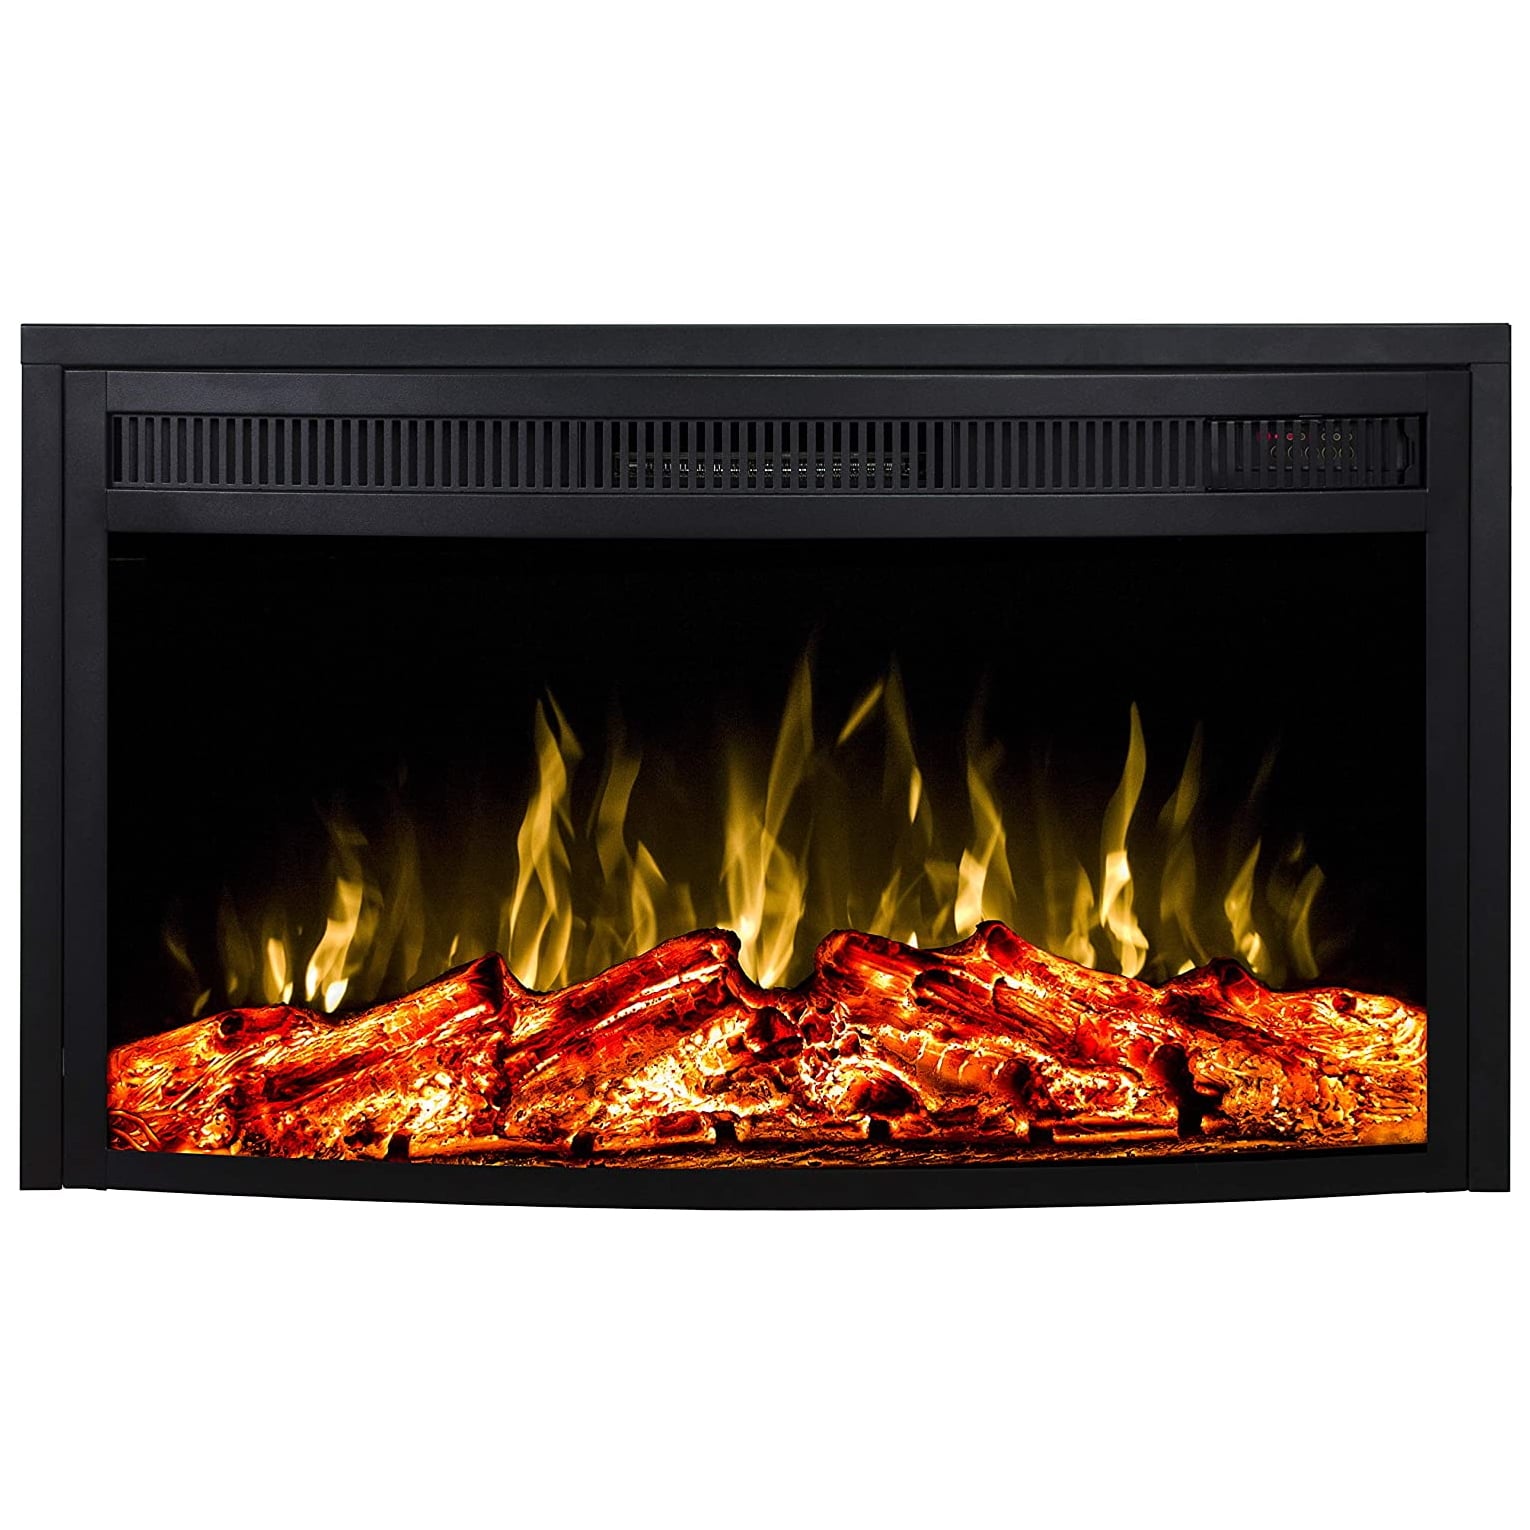 Regal Flame Curved Electric Fireplace Insert